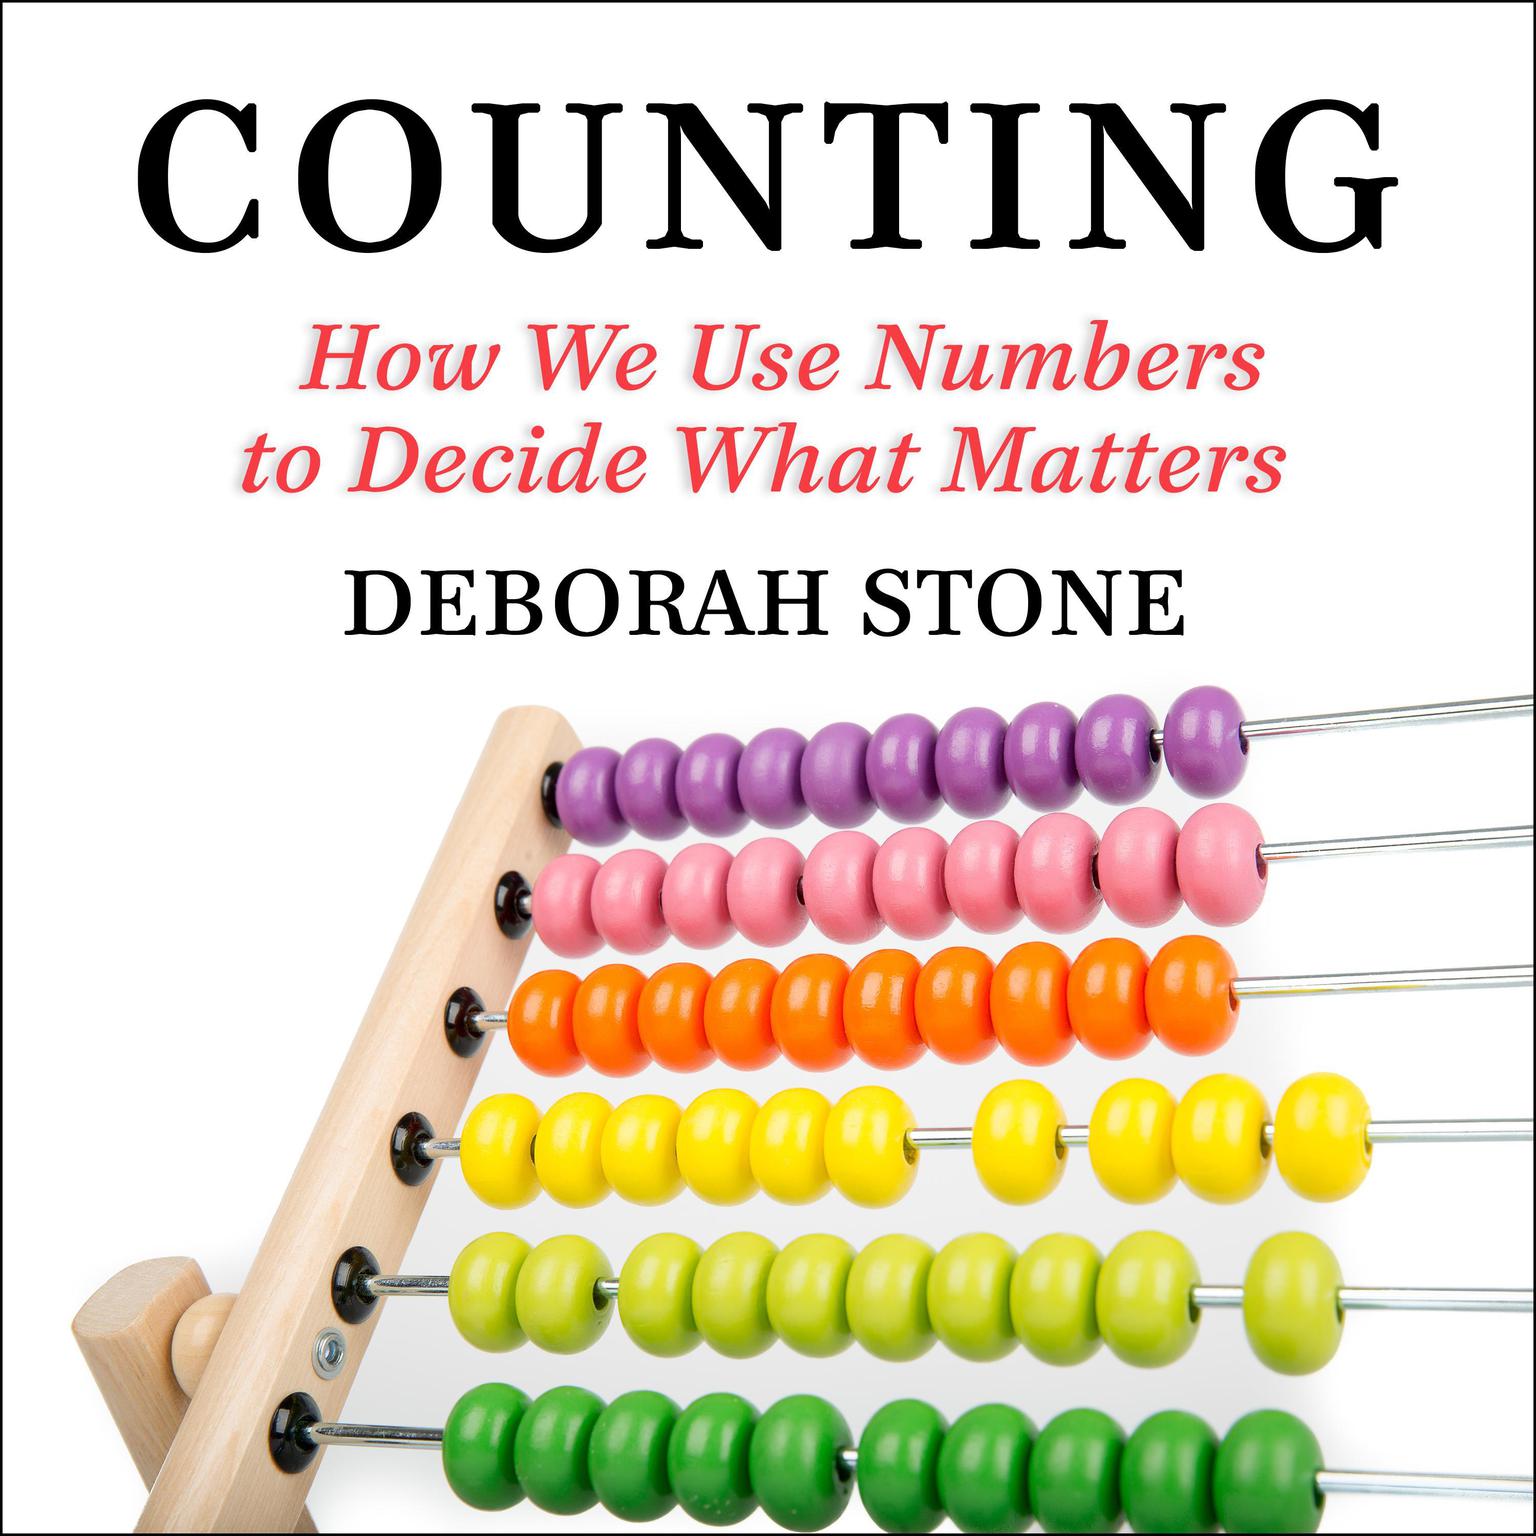 Counting: How We Use Numbers to Decide What Matters Audiobook, by Deborah Stone